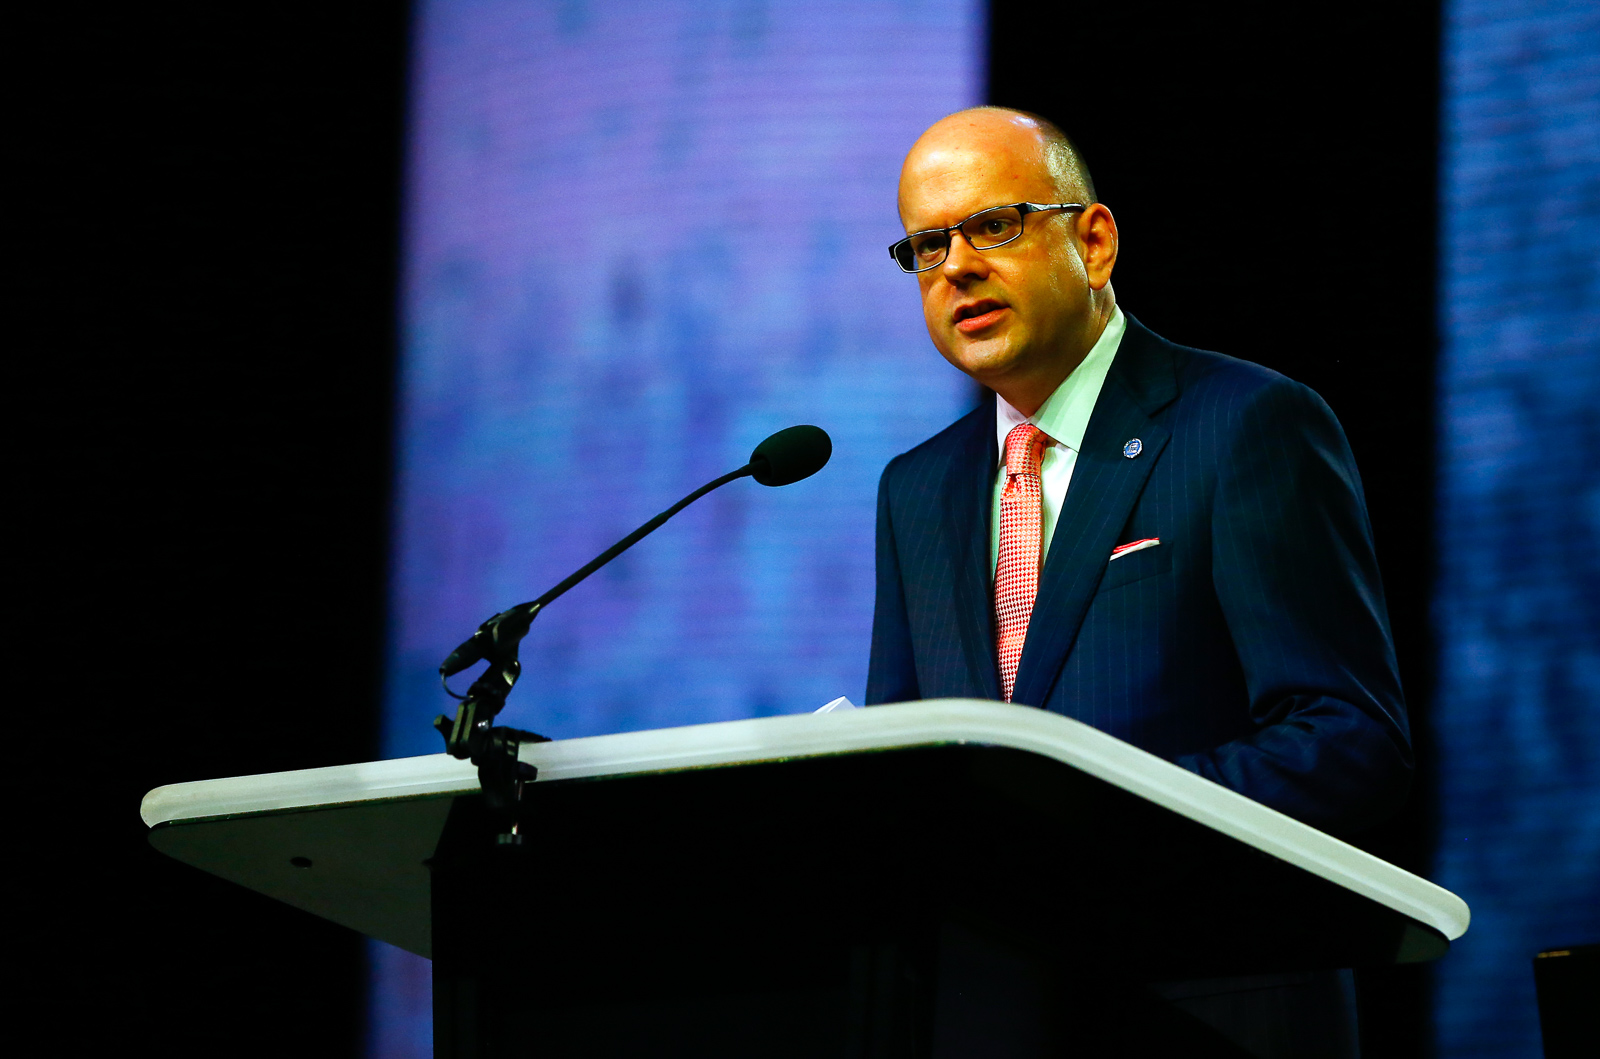 Adam Greenway addresses the annual meeting of the Southern Baptist Convention at the Birmingham-Jefferson Convention Complex on June 12, 2019, in Birmingham, Alabama. RNS photo by Butch Dill